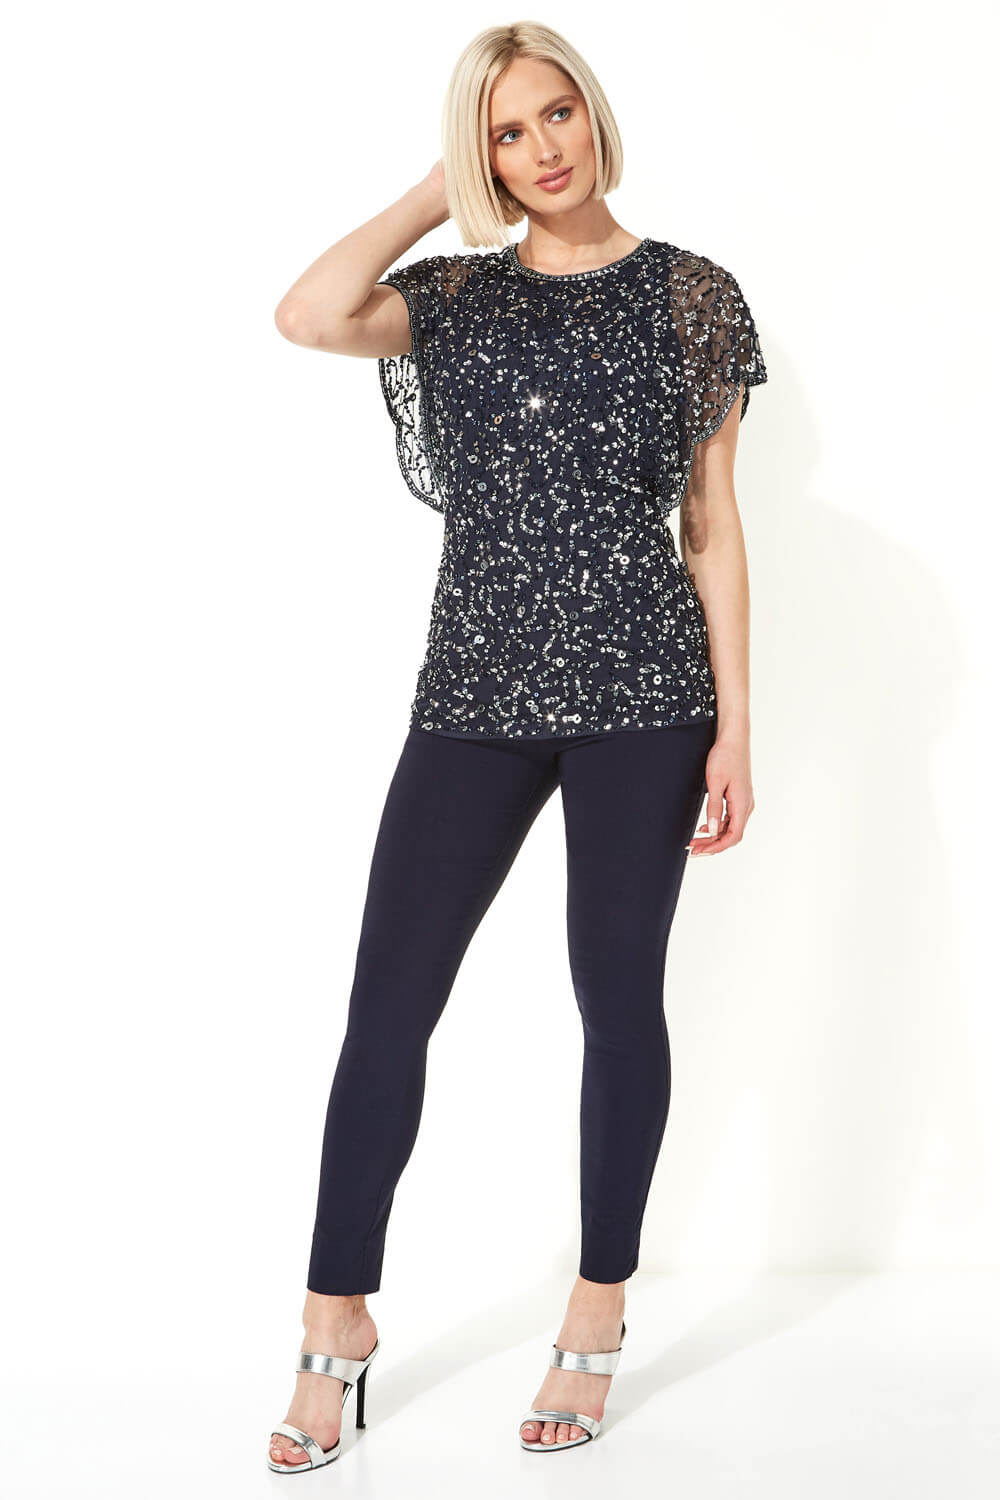 Midnight Blue Sequin Embellished Angel Sleeve Top, Image 2 of 5